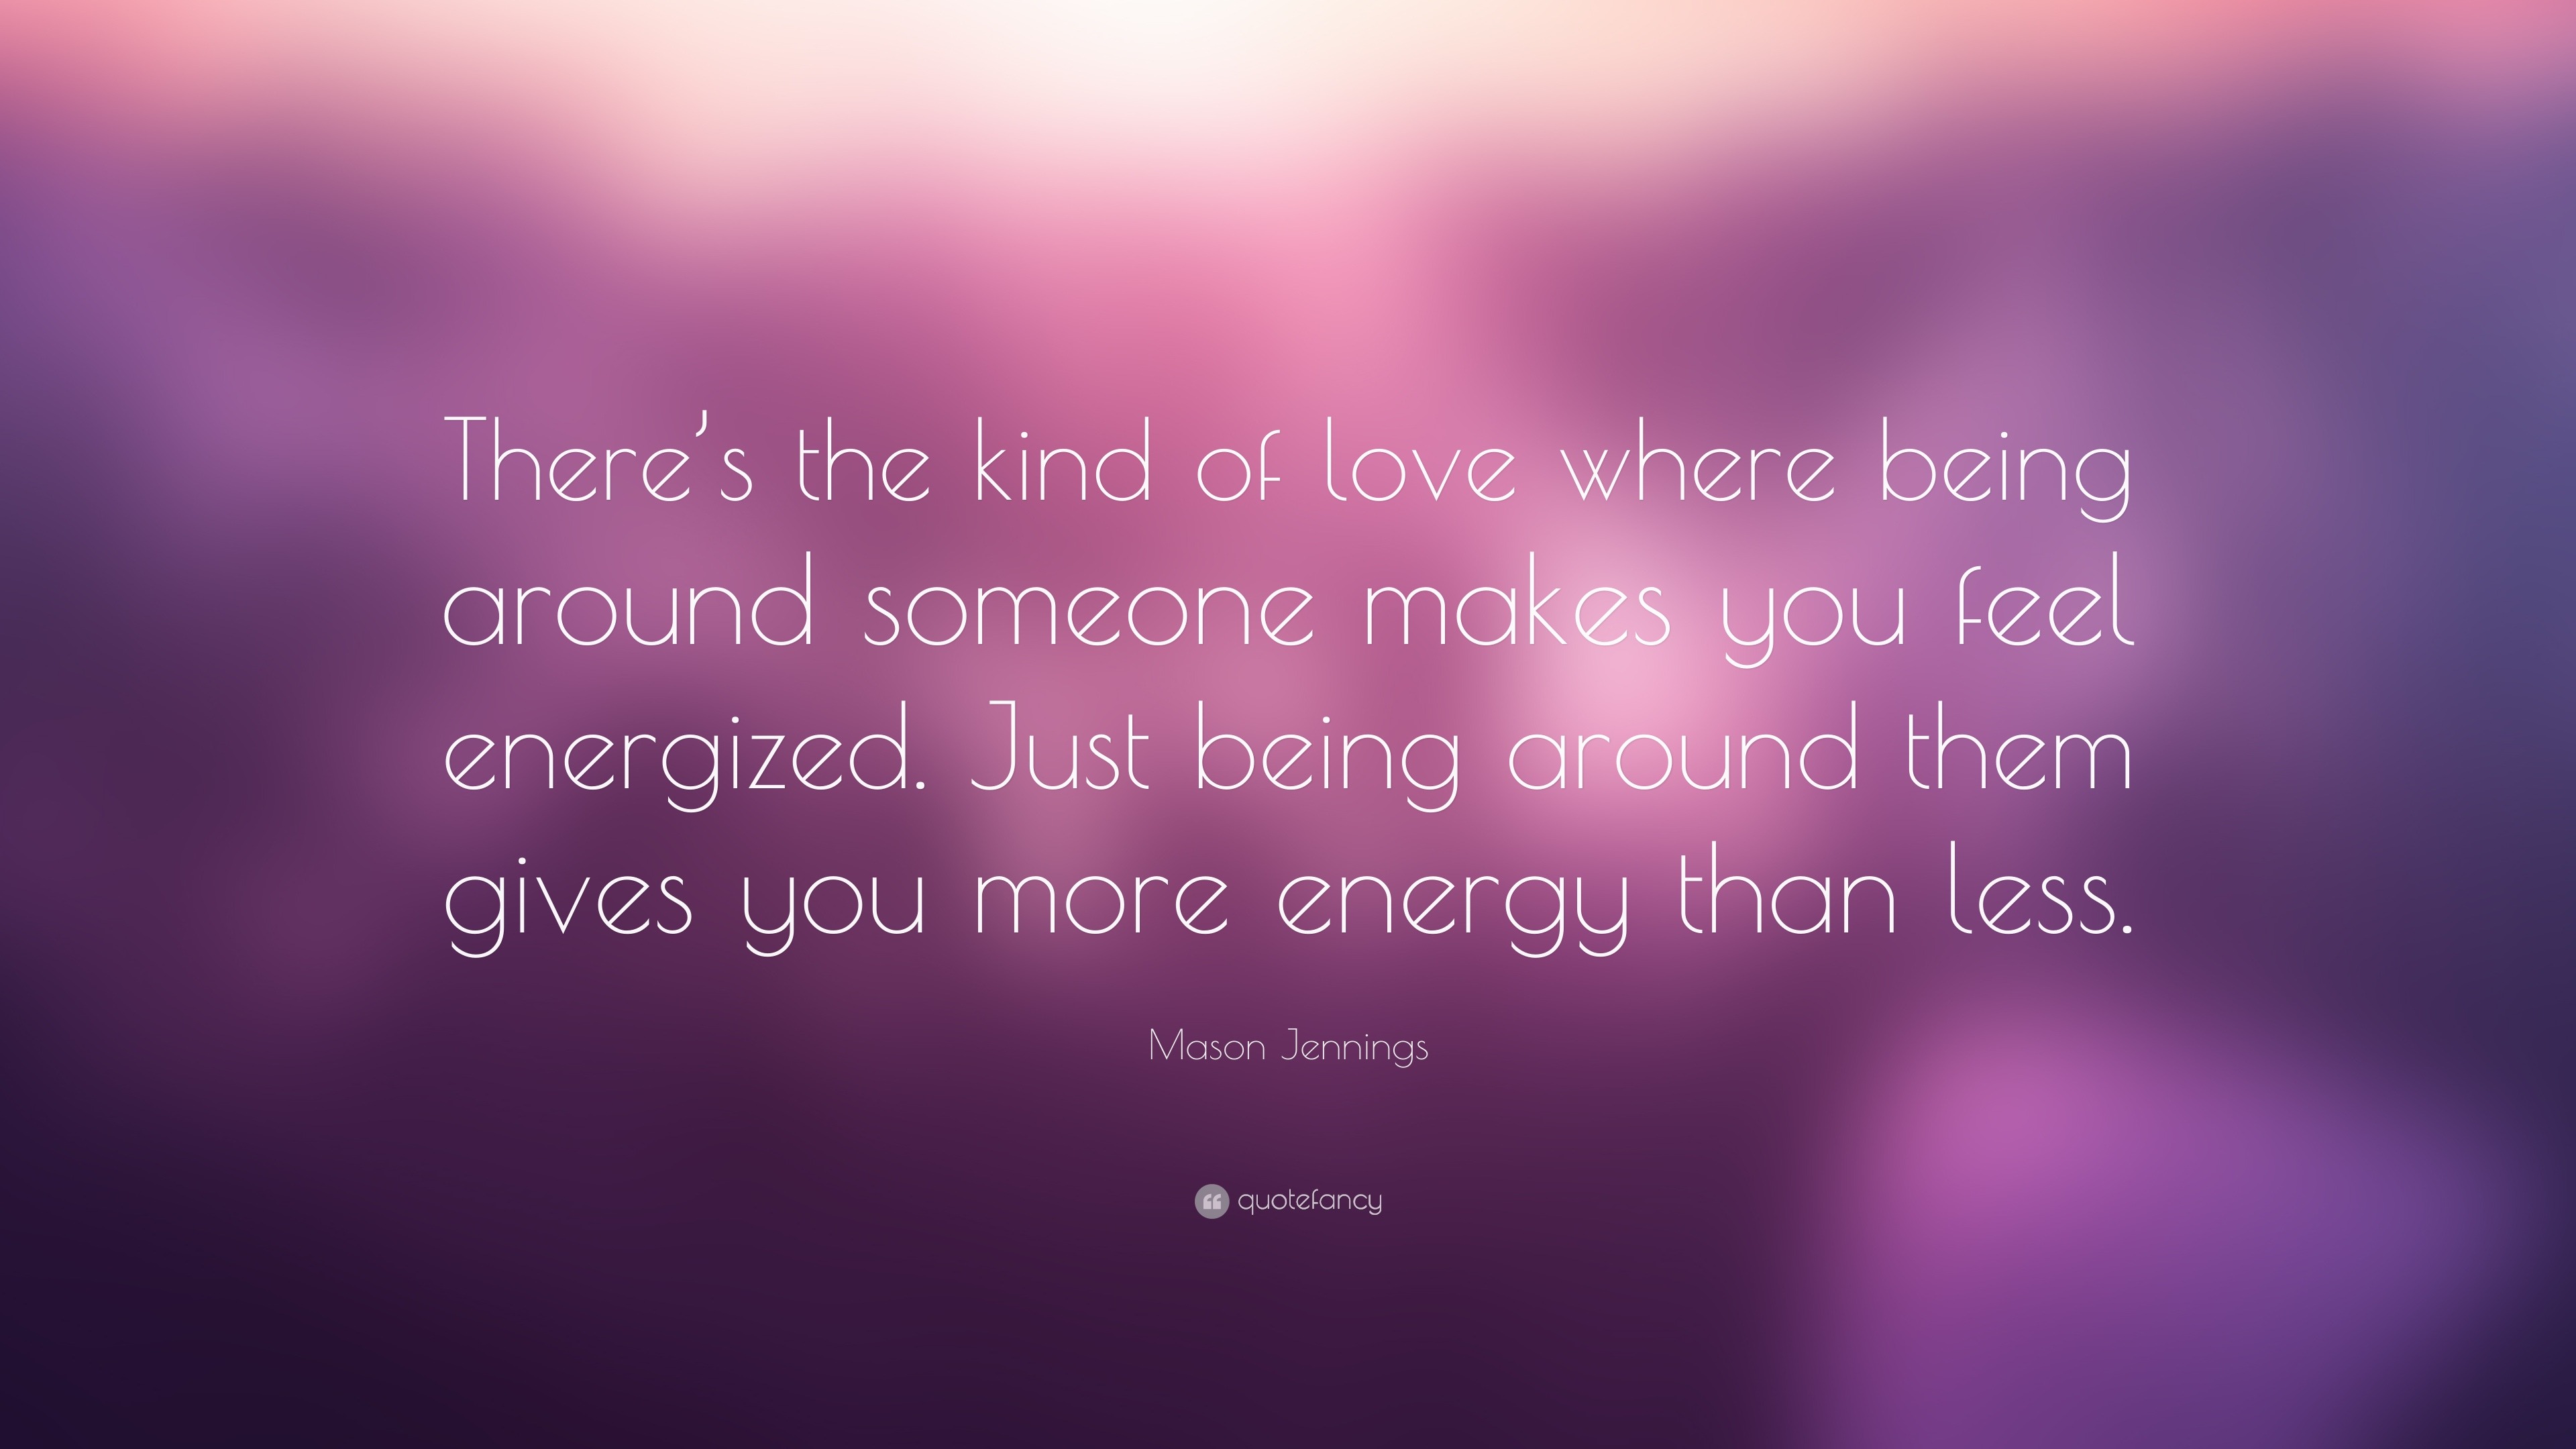 Mason Jennings Quote “There s the kind of love where being around someone makes you